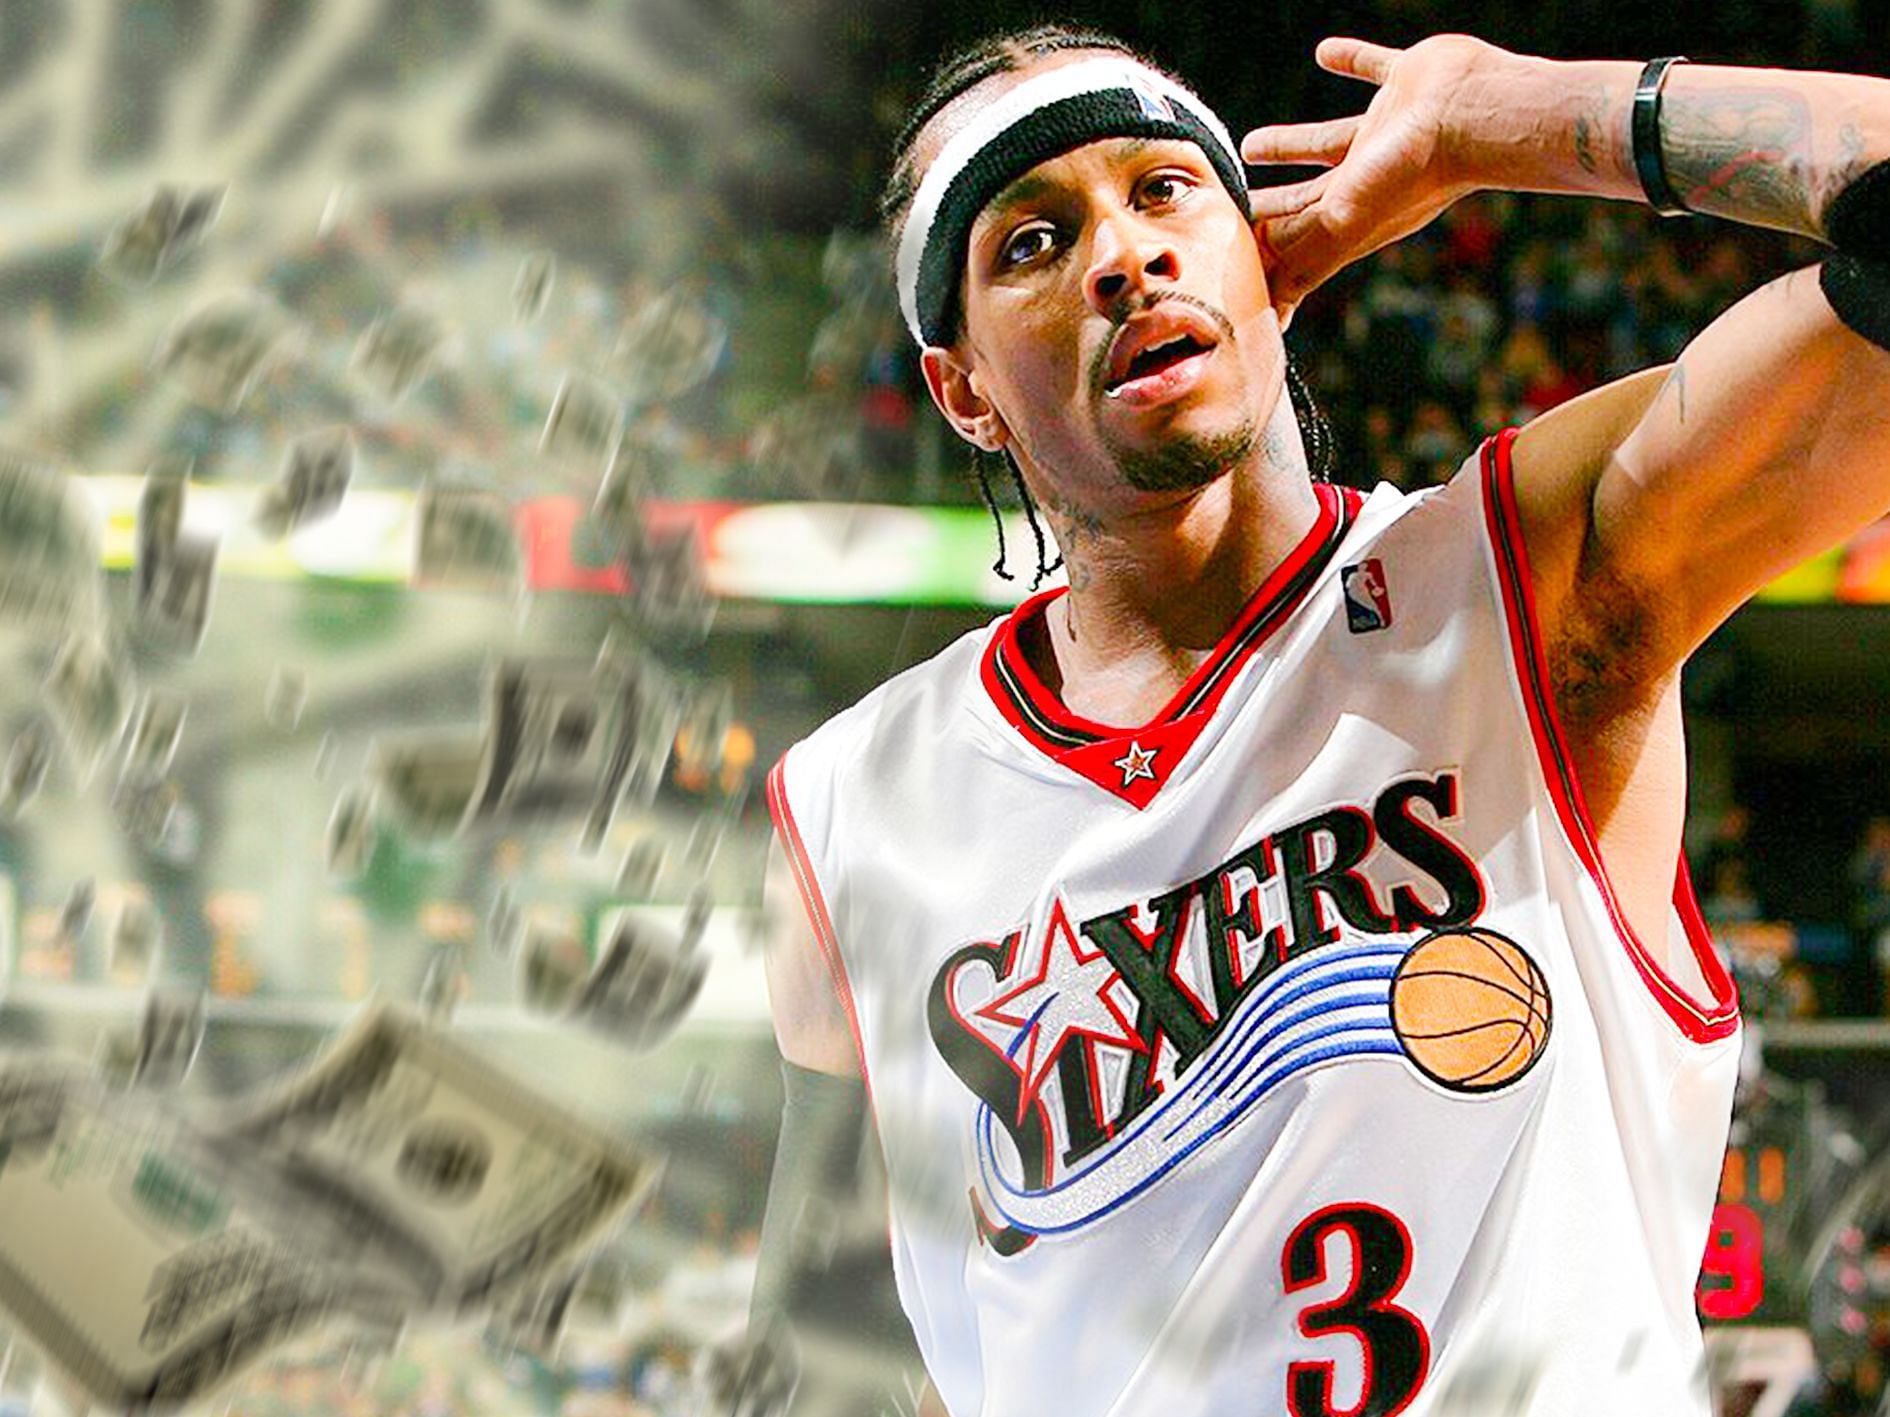 The story of Allen Iverson spending his NBA earnings, and how Reebok has helped him